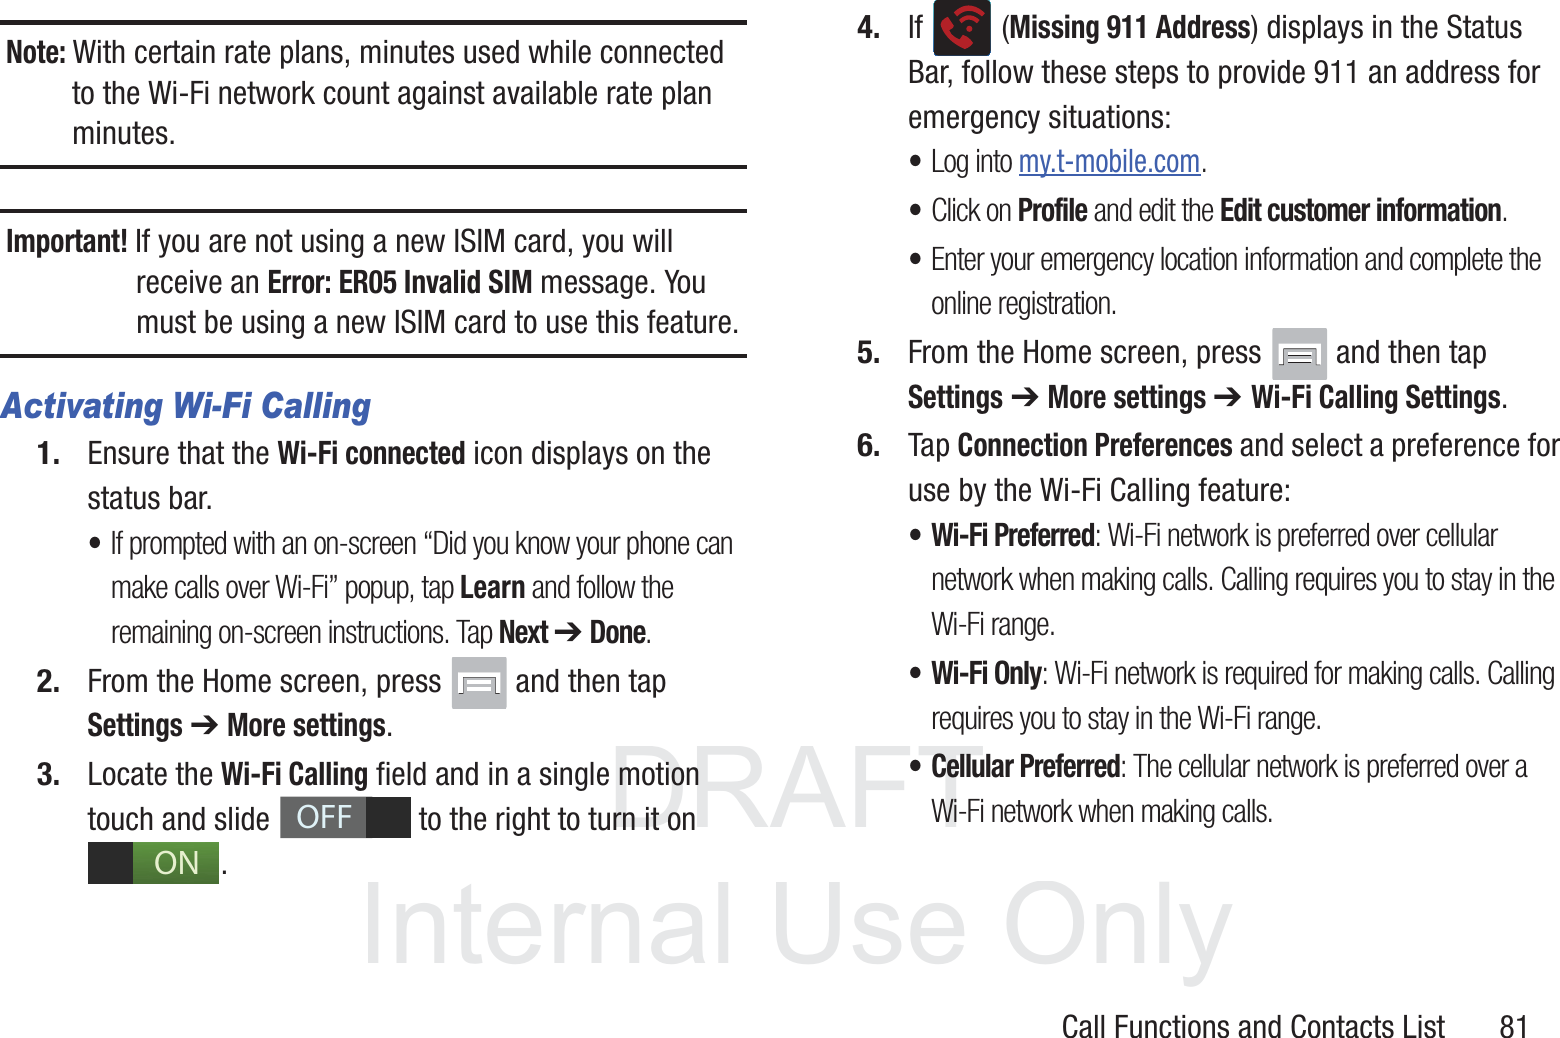 DRAFT InternalUse OnlyCall Functions and Contacts List       81Note: With certain rate plans, minutes used while connected to the Wi-Fi network count against available rate plan minutes.Important! If you are not using a new ISIM card, you will receive an Error: ER05 Invalid SIM message. You must be using a new ISIM card to use this feature.Activating Wi-Fi Calling1. Ensure that the Wi-Fi connected icon displays on the status bar. •If prompted with an on-screen “Did you know your phone can make calls over Wi-Fi” popup, tap Learn and follow the remaining on-screen instructions. Tap Next ➔ Done.2. From the Home screen, press   and then tap Settings ➔ More settings.3. Locate the Wi-Fi Calling field and in a single motion touch and slide   to the right to turn it on . 4. If  (Missing 911 Address) displays in the Status Bar, follow these steps to provide 911 an address for emergency situations:•Log into my.t-mobile.com.•Click on Profile and edit the Edit customer information.•Enter your emergency location information and complete the online registration.5. From the Home screen, press   and then tap Settings ➔ More settings ➔ Wi-Fi Calling Settings.6. Tap Connection Preferences and select a preference for use by the Wi-Fi Calling feature:• Wi-Fi Preferred: Wi-Fi network is preferred over cellular network when making calls. Calling requires you to stay in the Wi-Fi range.• Wi-Fi Only: Wi-Fi network is required for making calls. Calling requires you to stay in the Wi-Fi range.• Cellular Preferred: The cellular network is preferred over a Wi-Fi network when making calls.OFFON